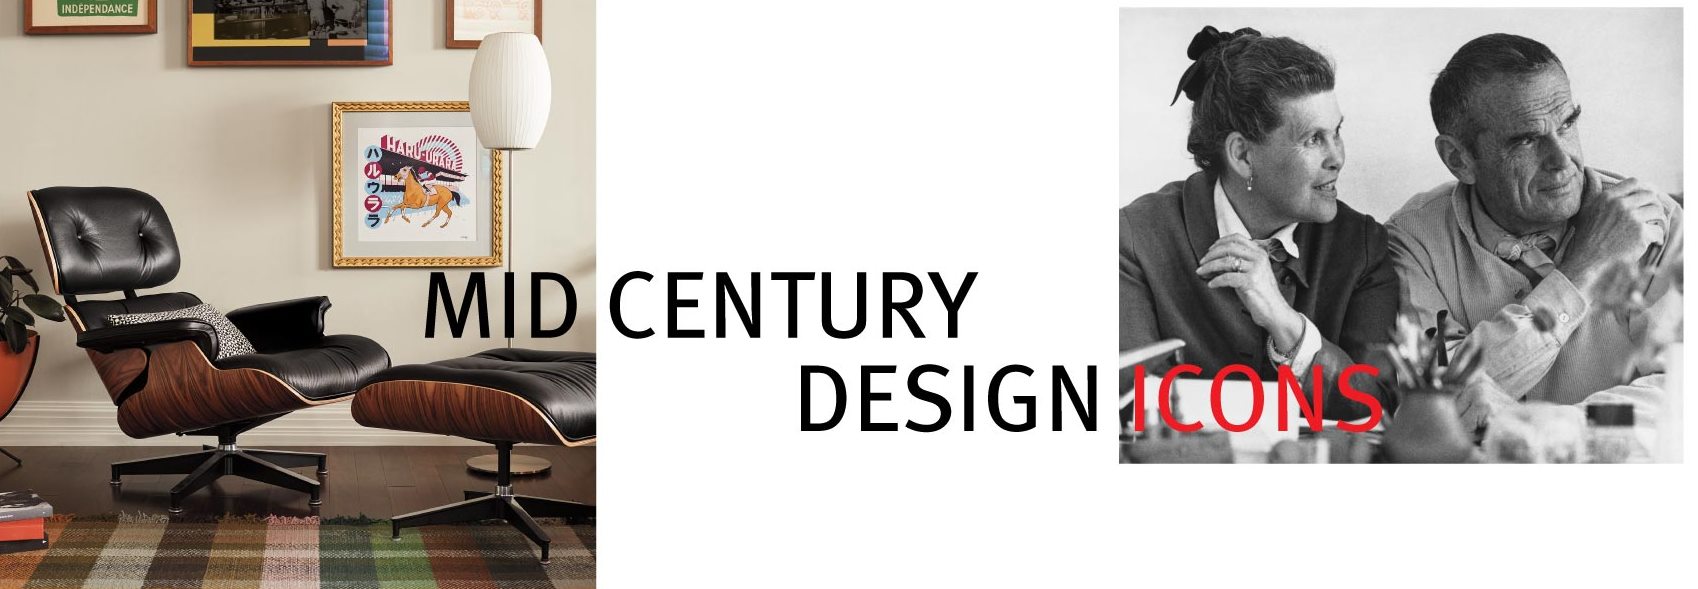 Mid Century design icons Charles and Ray Eames